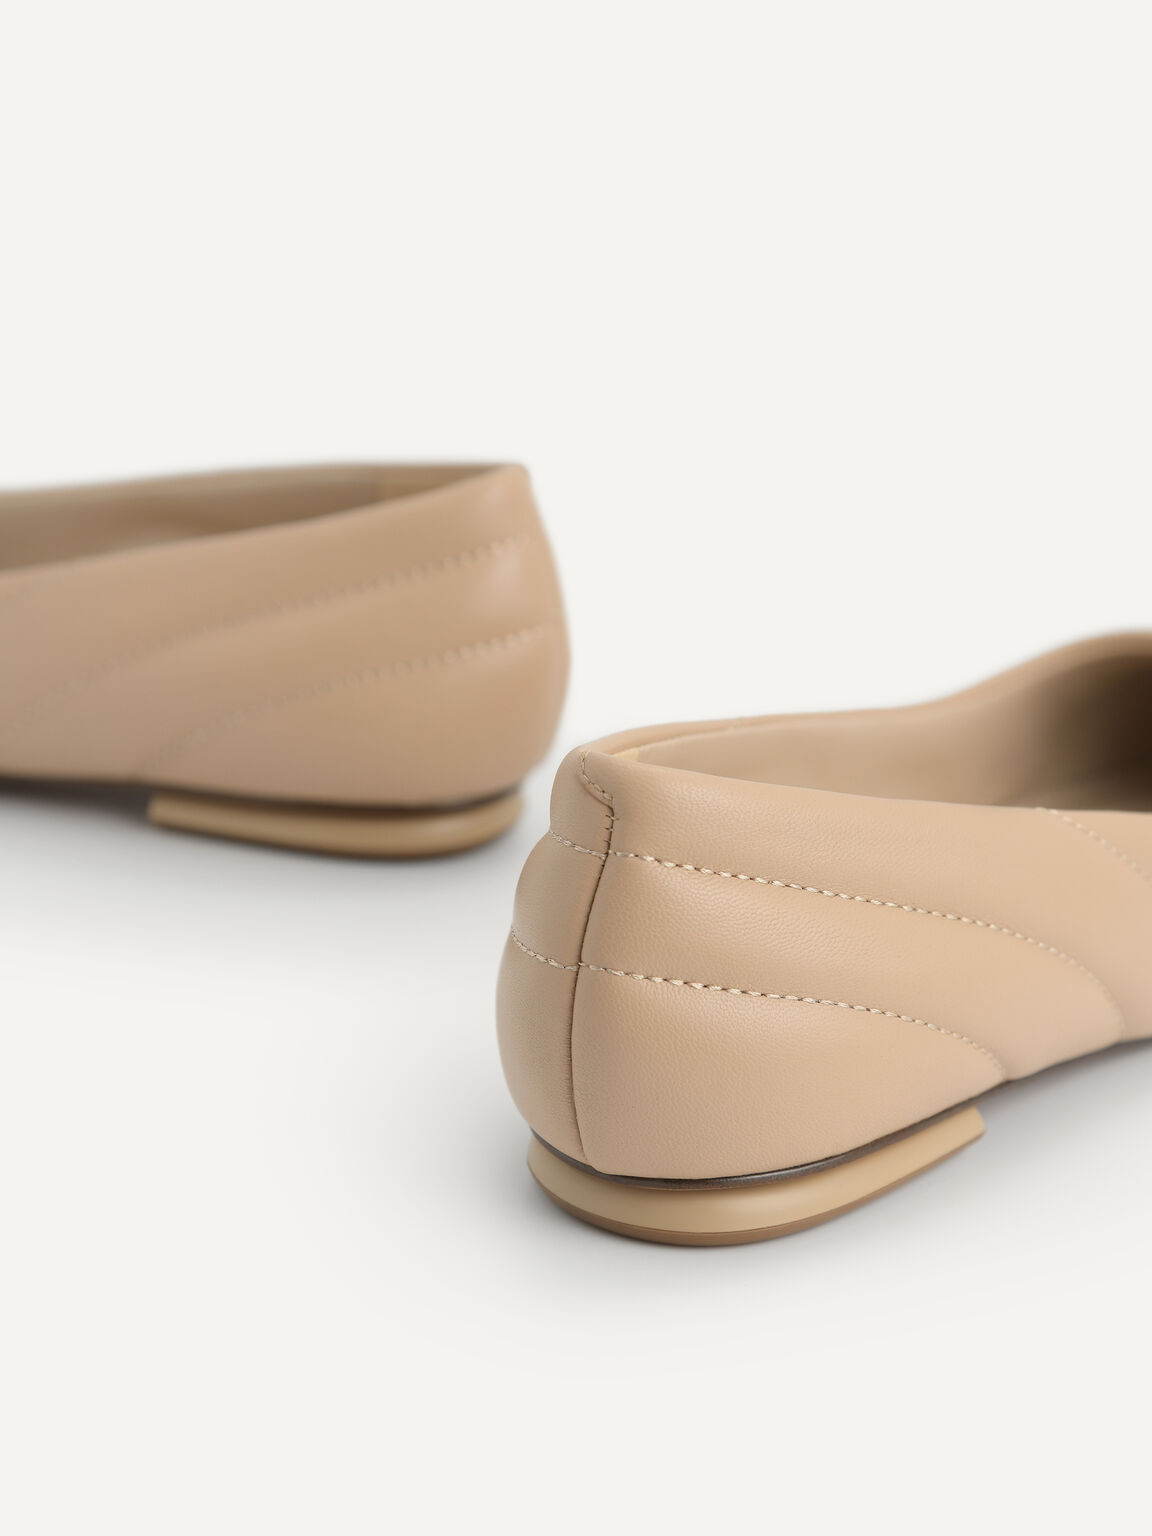 Pointed Toe Leather Flats, Sand